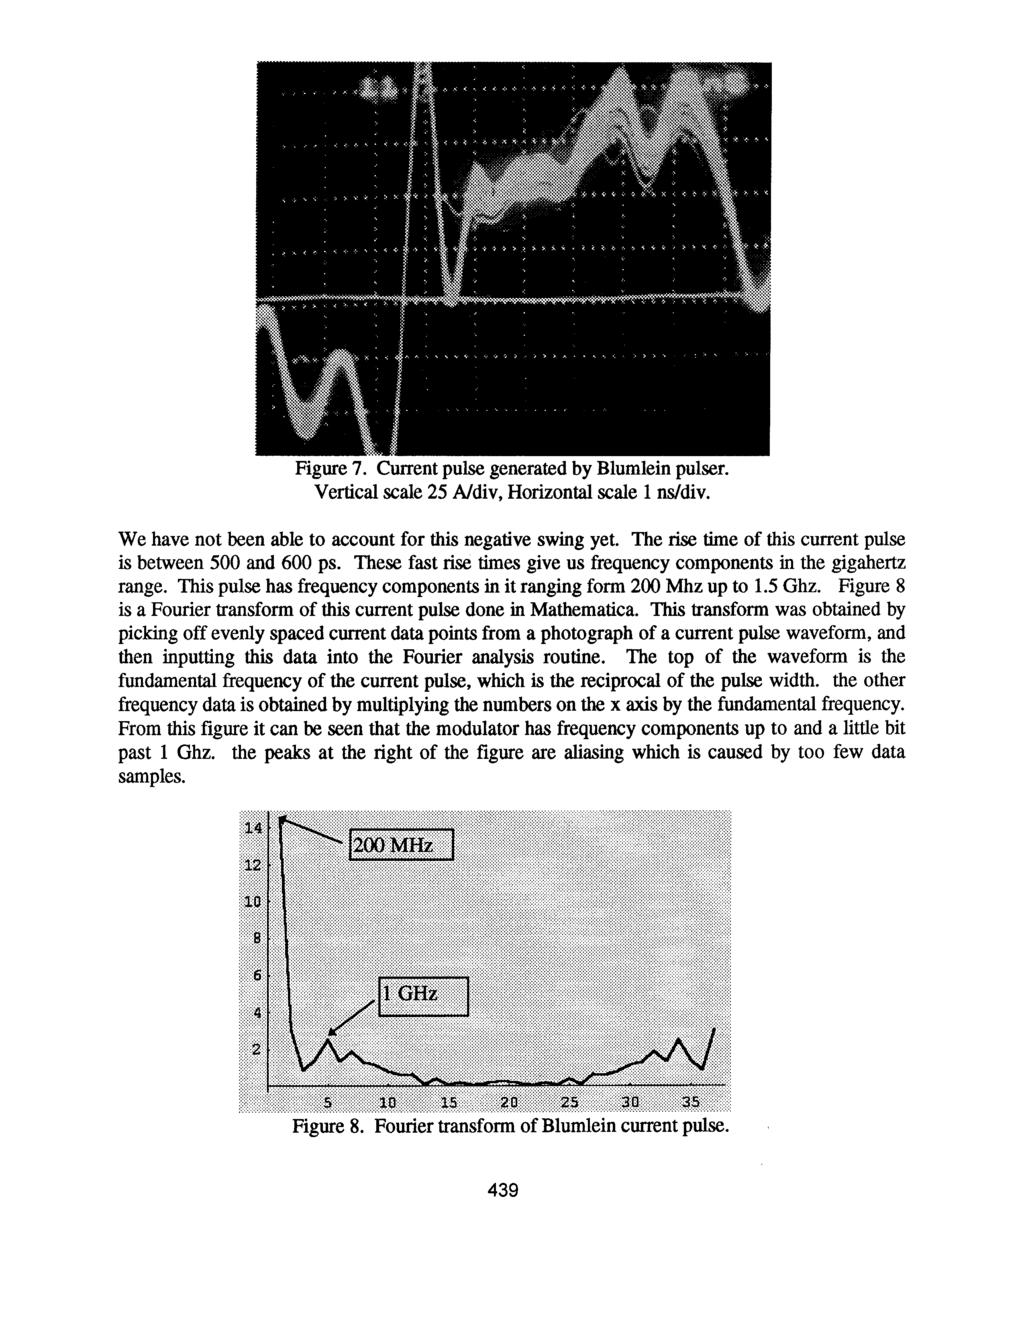 Figure 7. Current pulse generated by Blumlein pulser. Vertical scale 25 Ndiv, Horizontal scale 1 ns/div. We have not been able to account for this negative swing yet.